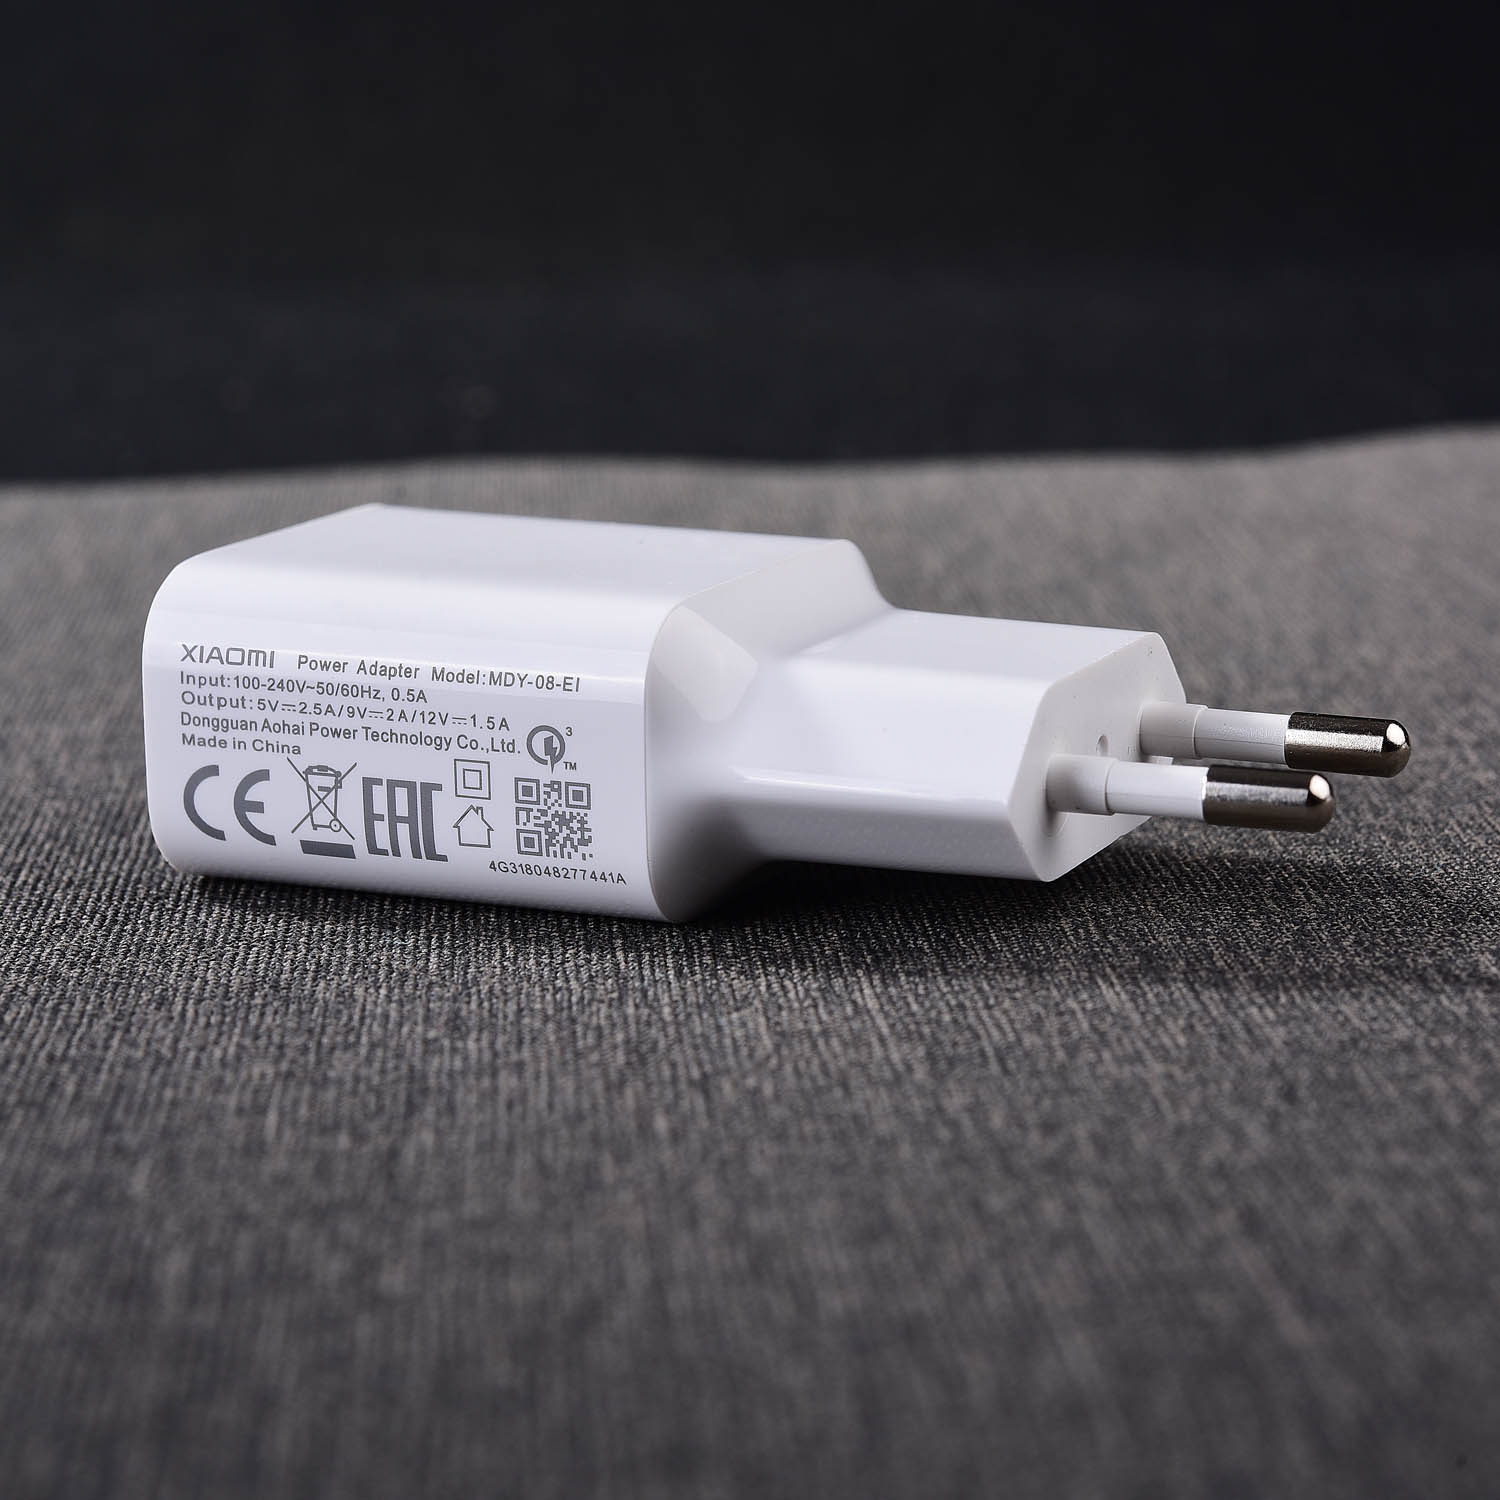 Originele Xiao Mi Fast Charger 18W Usb Quick Adapter 100 Cm TYPE-C Kabel Voor Mi 6 8 9 10 rode Mi Note 7 8 Pro A2 A3 Lite F1 MDY-08-EI: White Charger